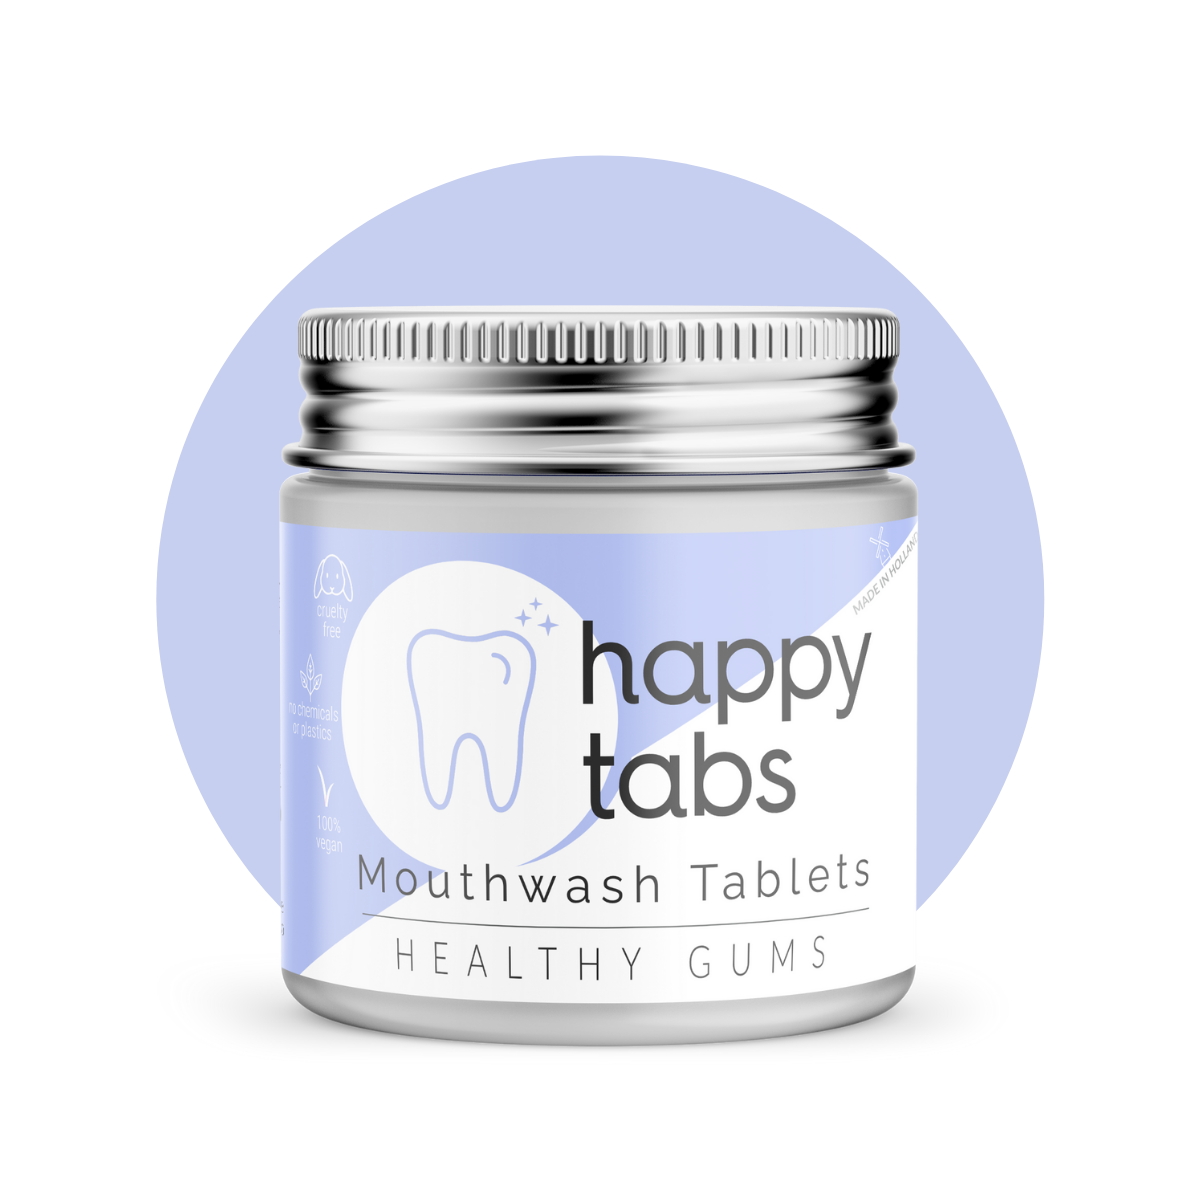 Mouthwash Tablets - Happy Tabs